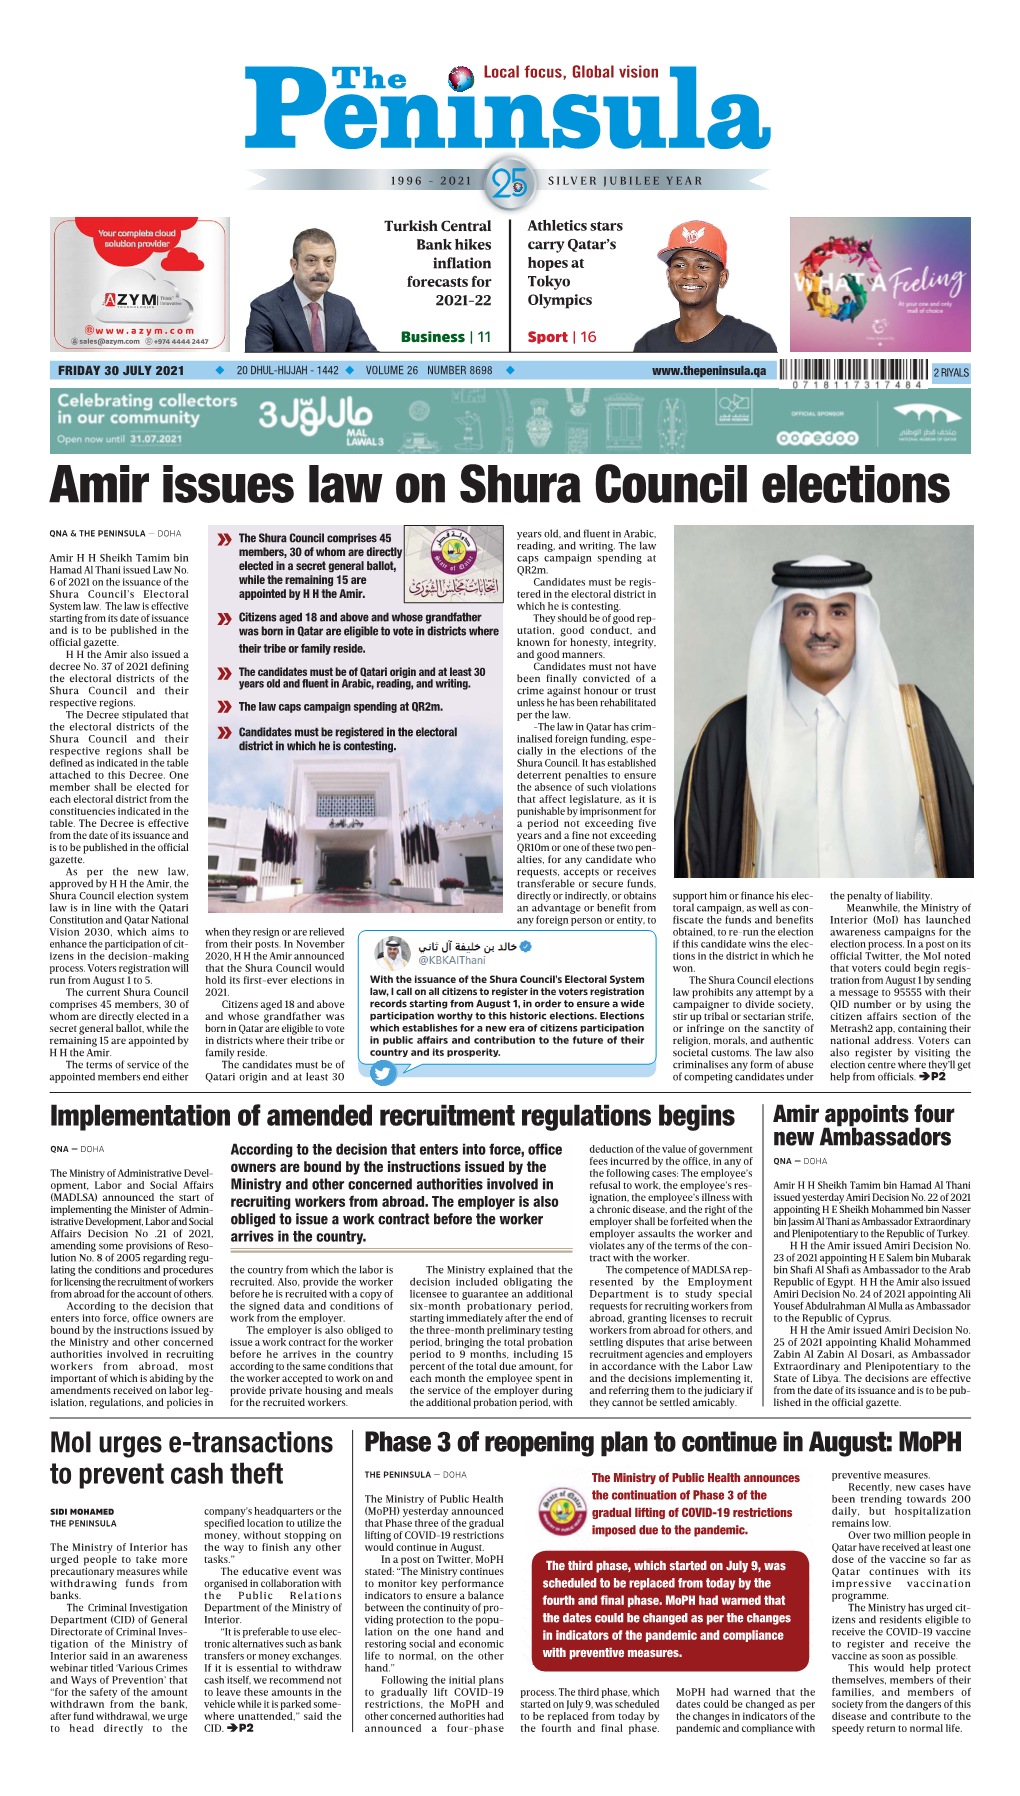 Amir Issues Law on Shura Council Elections